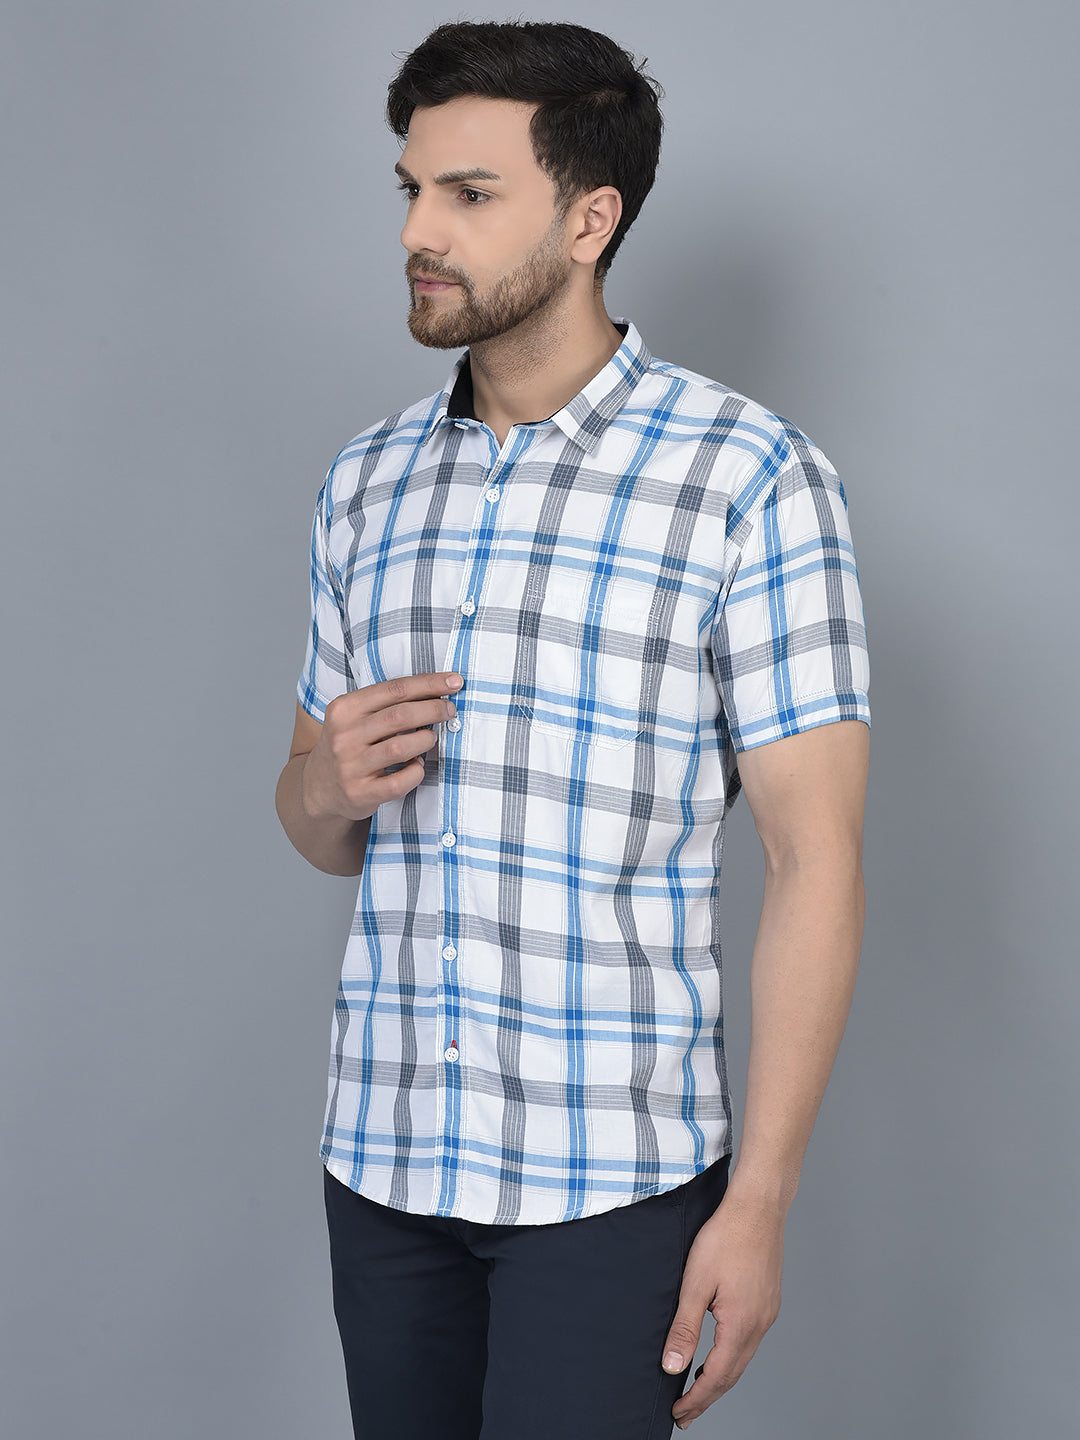 Timeless Elegance with the Cobb White Check Slim Fit Casual Shirt